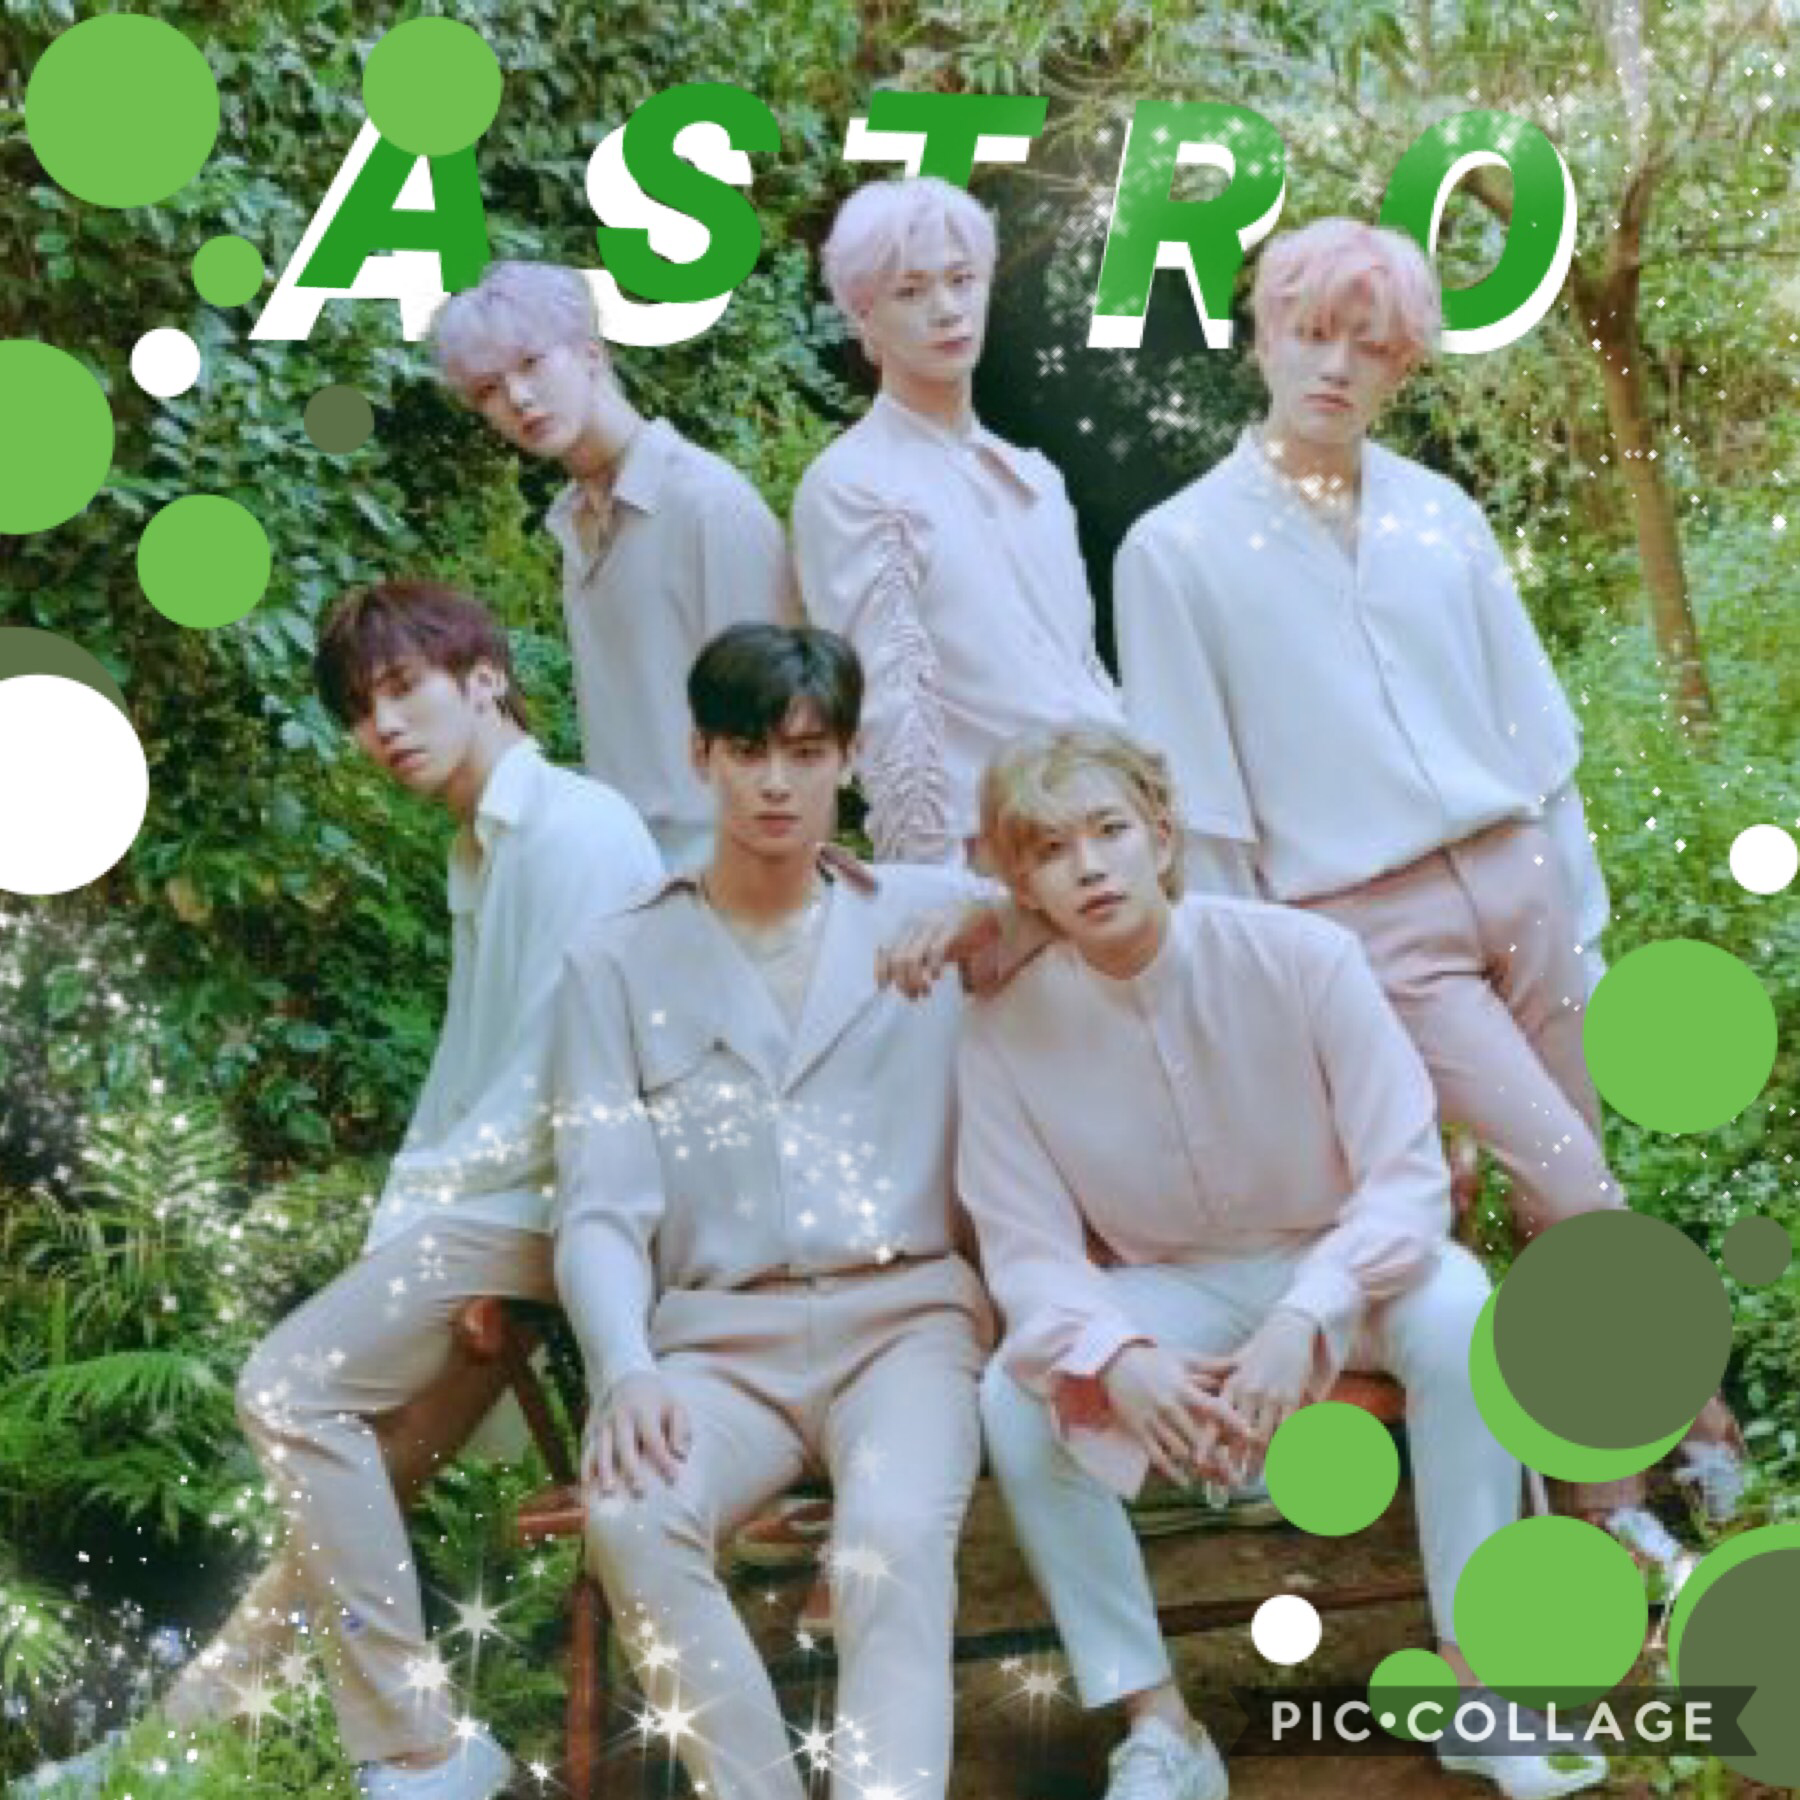 💚TAP💚
This is so bad but their comeback is too good.